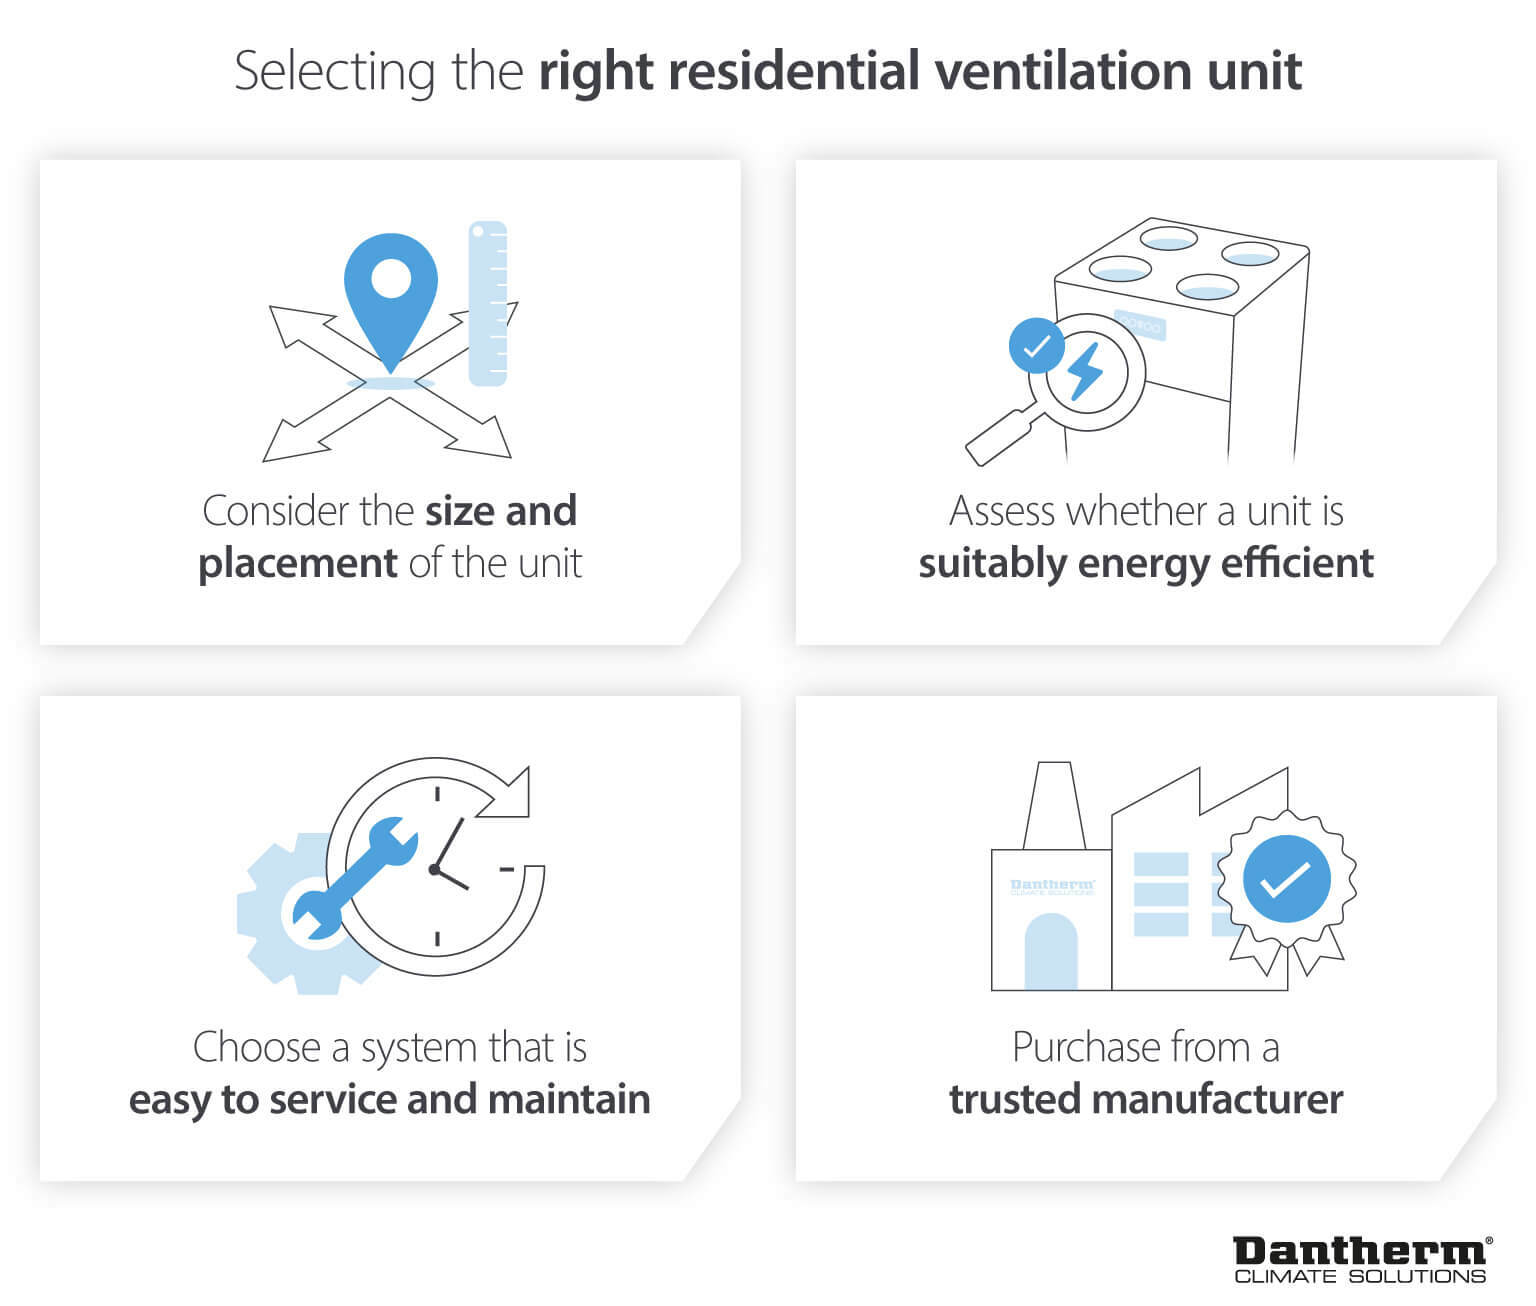 How to select the ideal residential ventilation unit or system to maximise energy efficiency - infographic